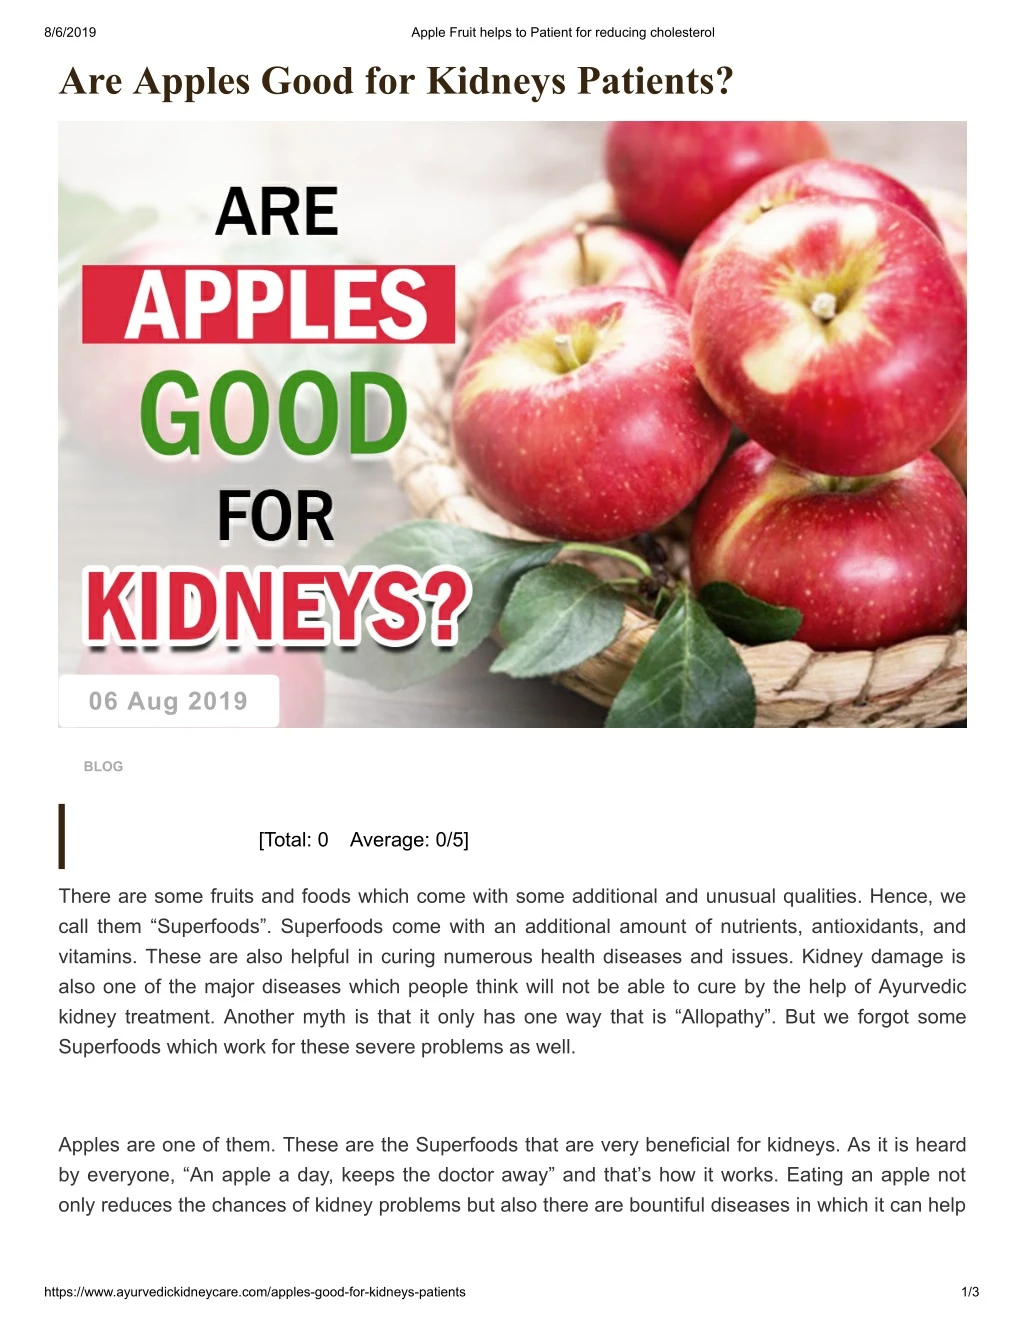 8 6 2019 are apples good for kidneys patients